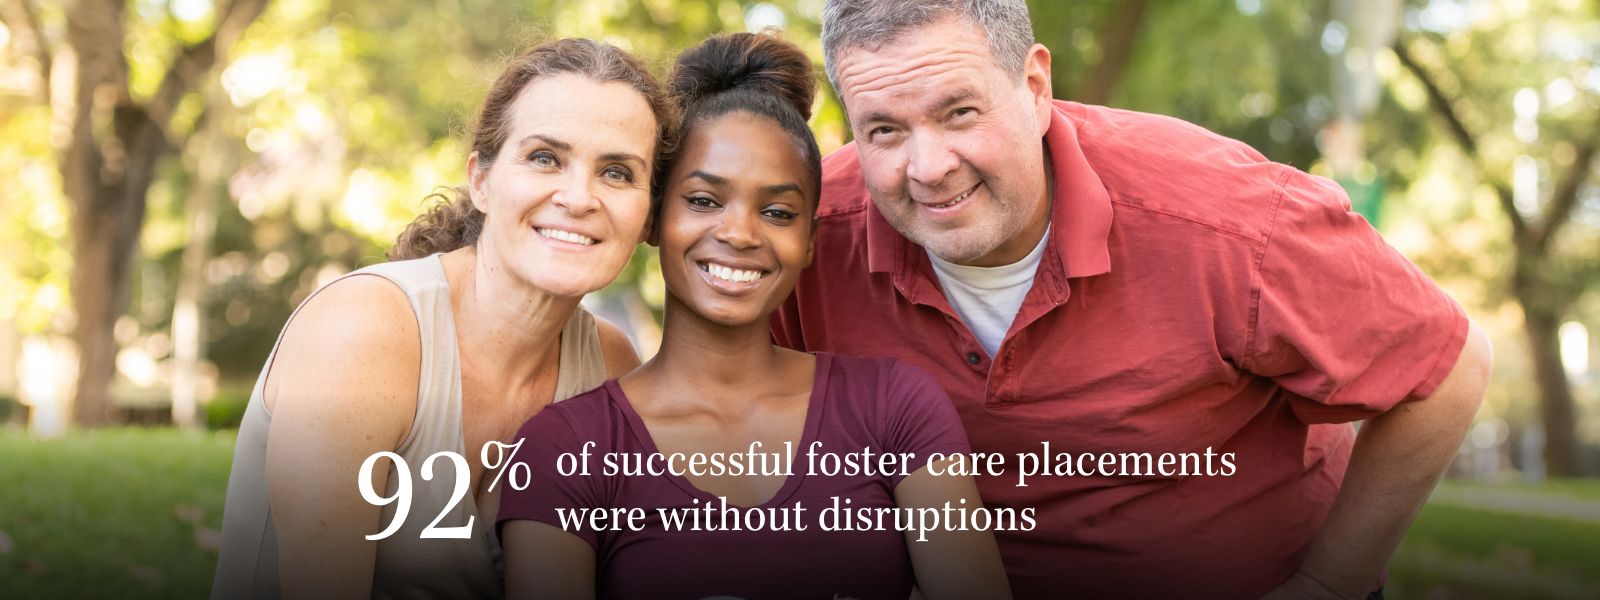 92% of successful foster care placements were without disruptions